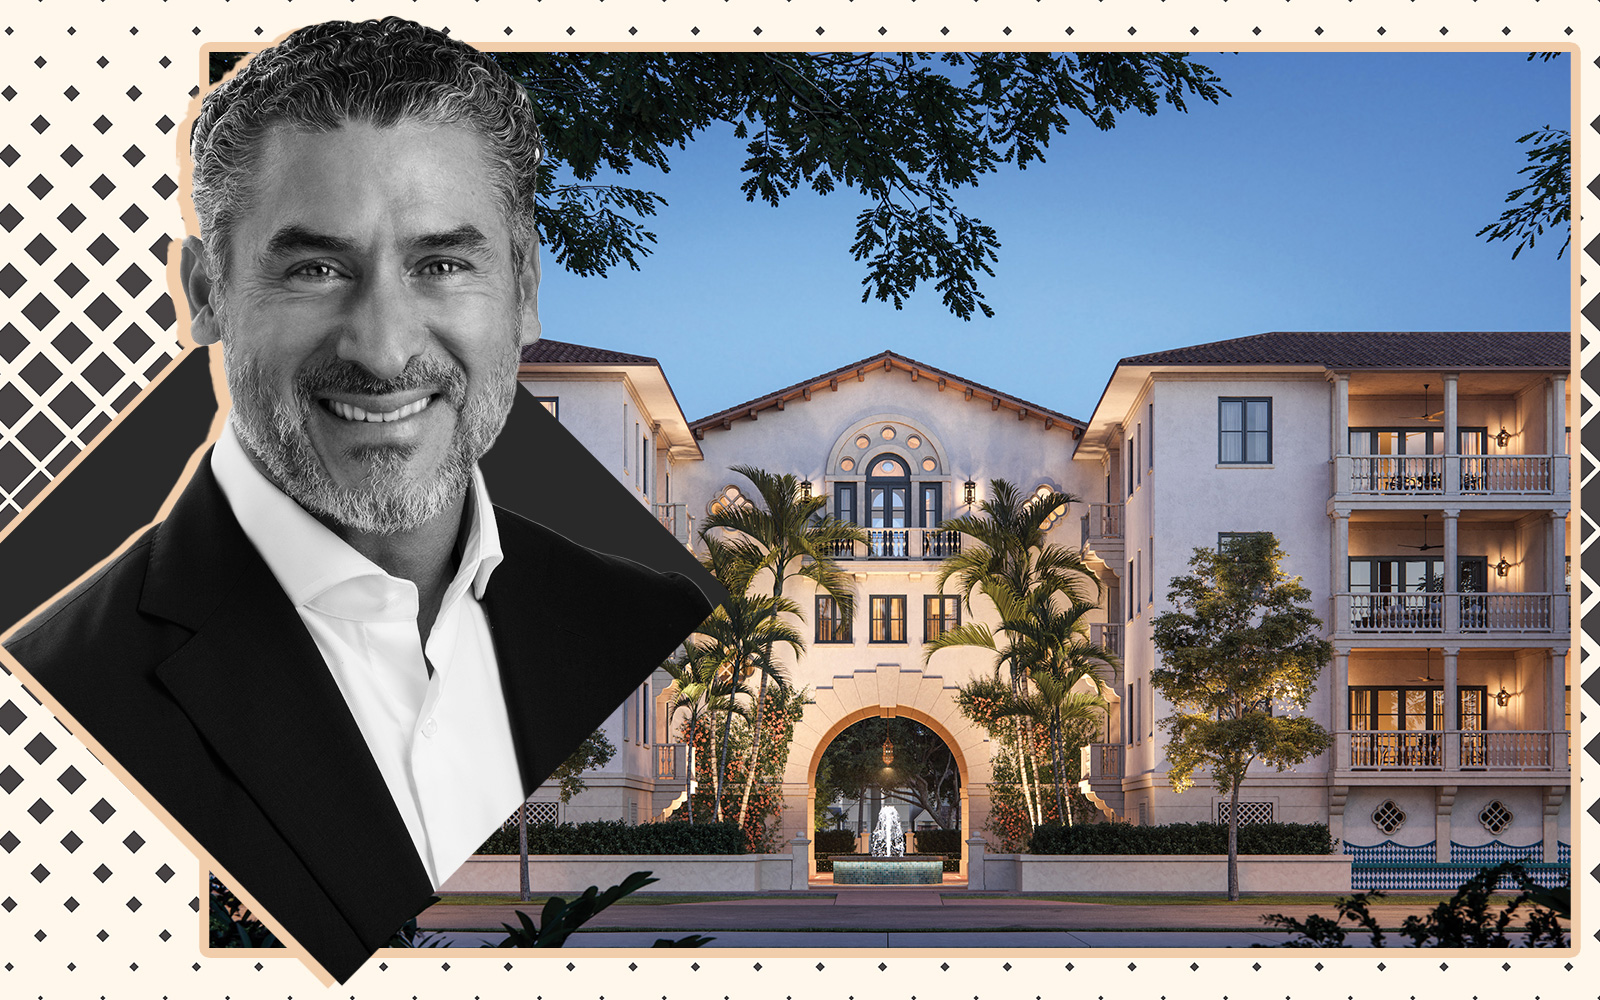 MG Developer moves forward with Village at Coral Gables project 